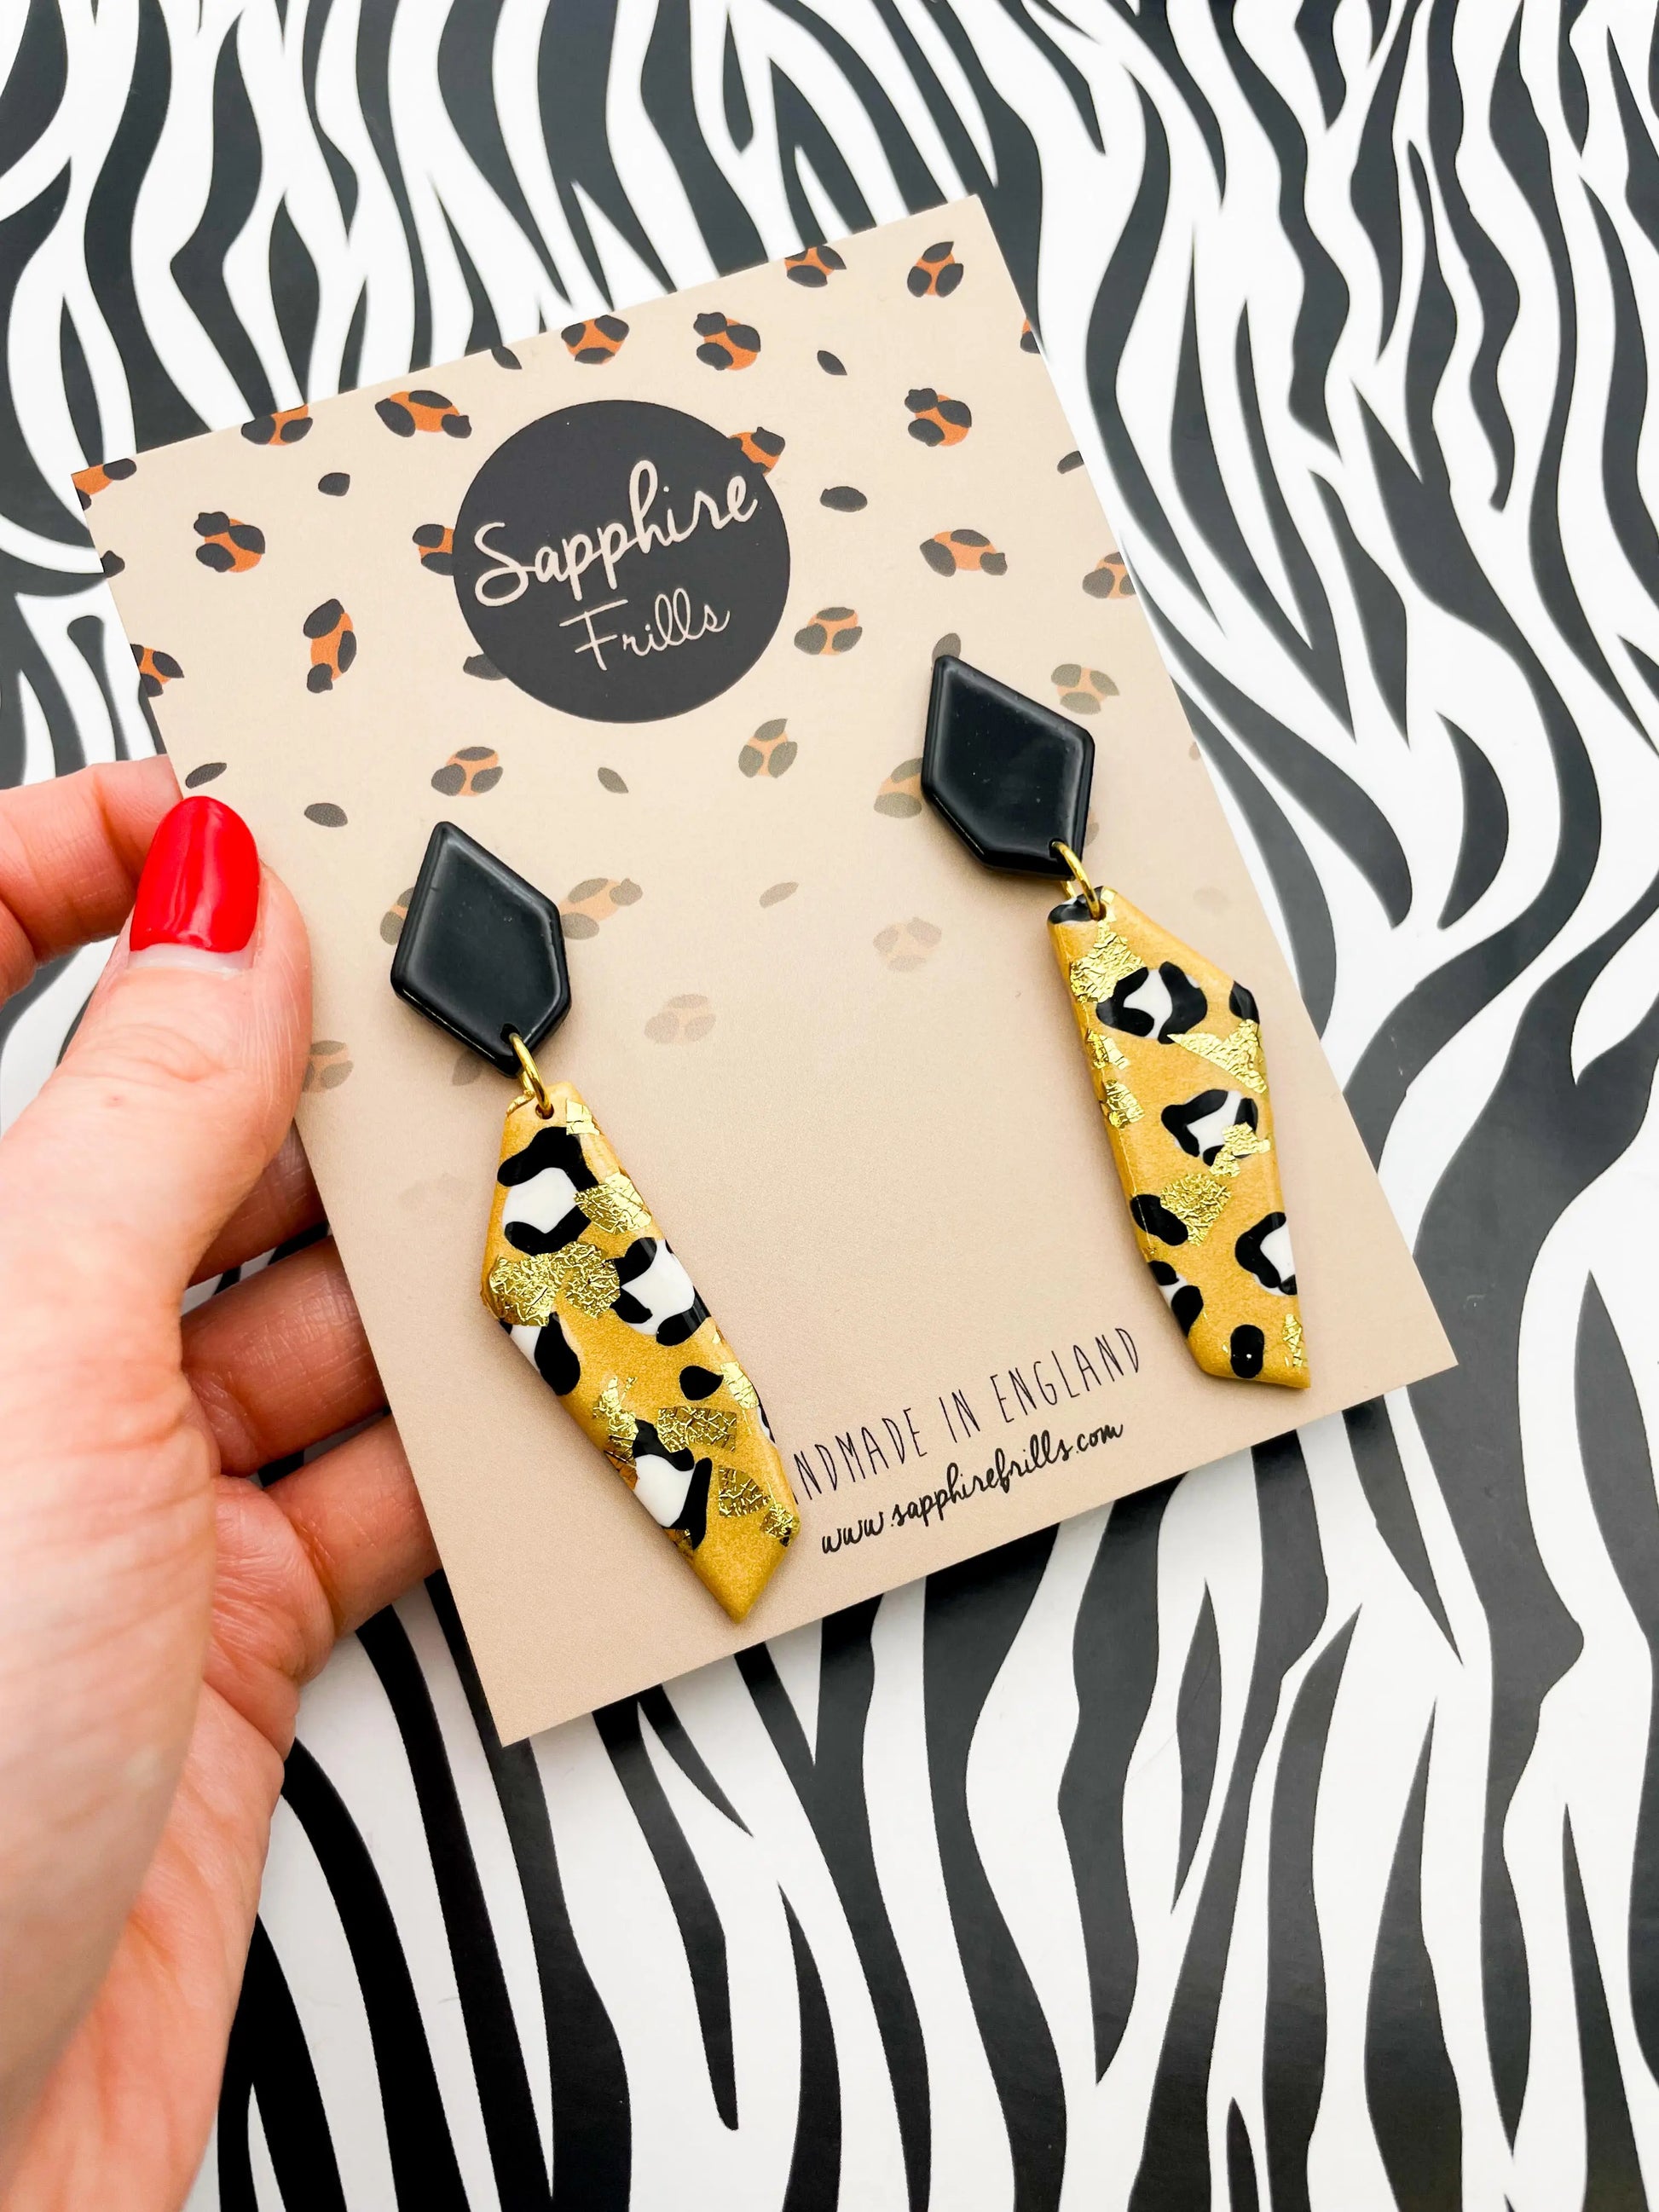 Metallic Gold and White Leopard Print Stone Dangle Earrings from Sapphire Frills